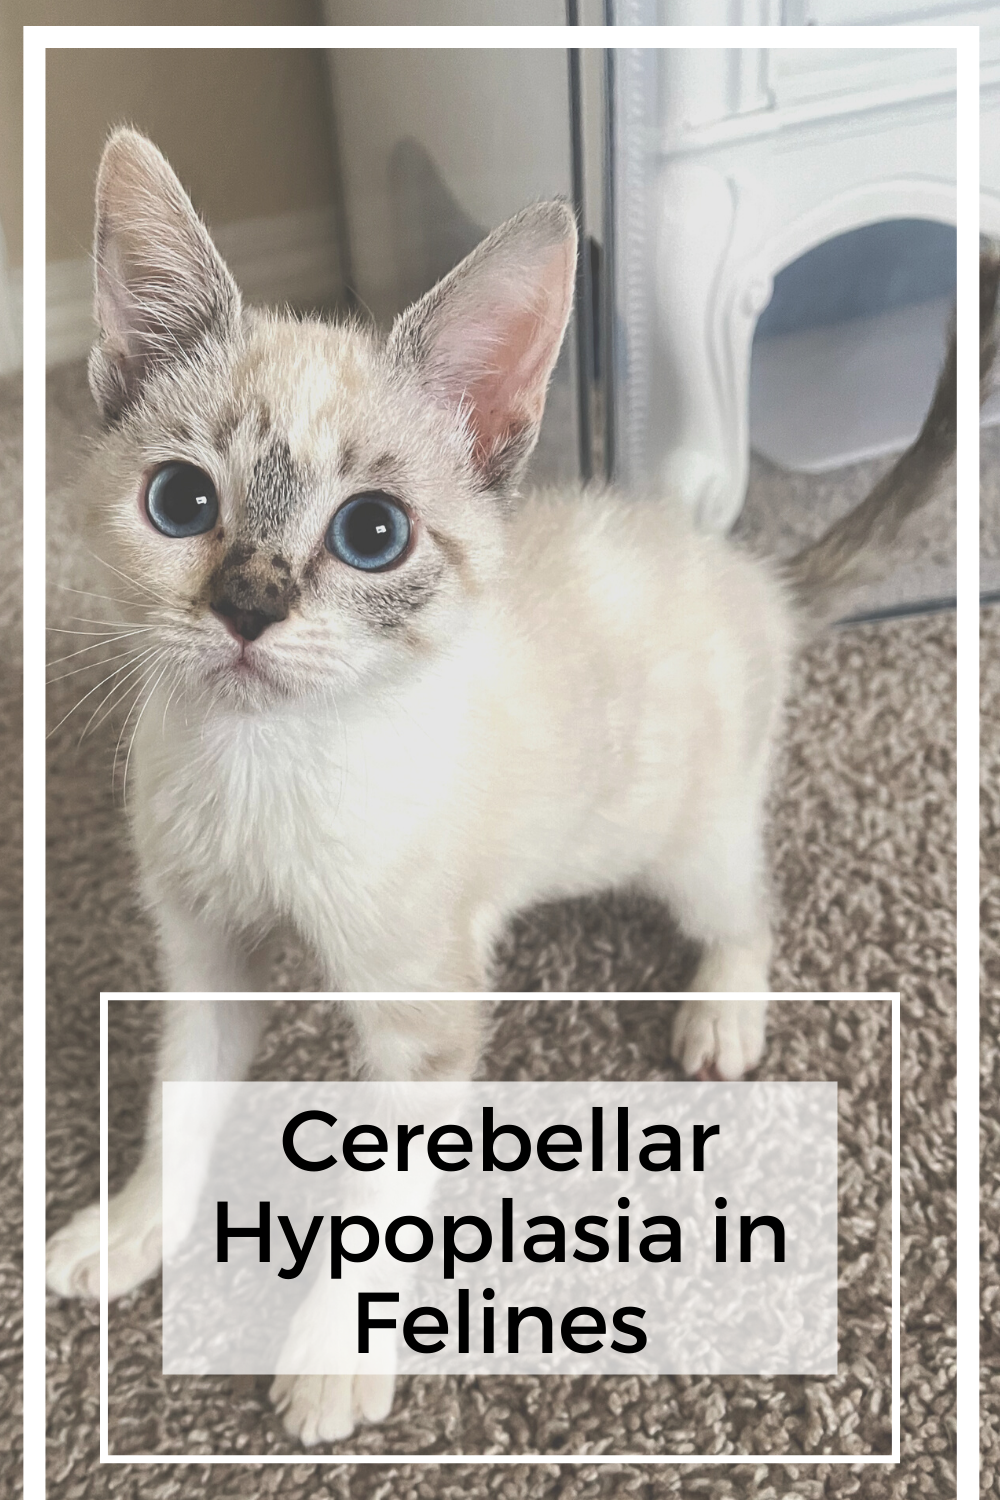 Cerebellar Hypoplasia in Felines: Symptoms, Causes, and Support